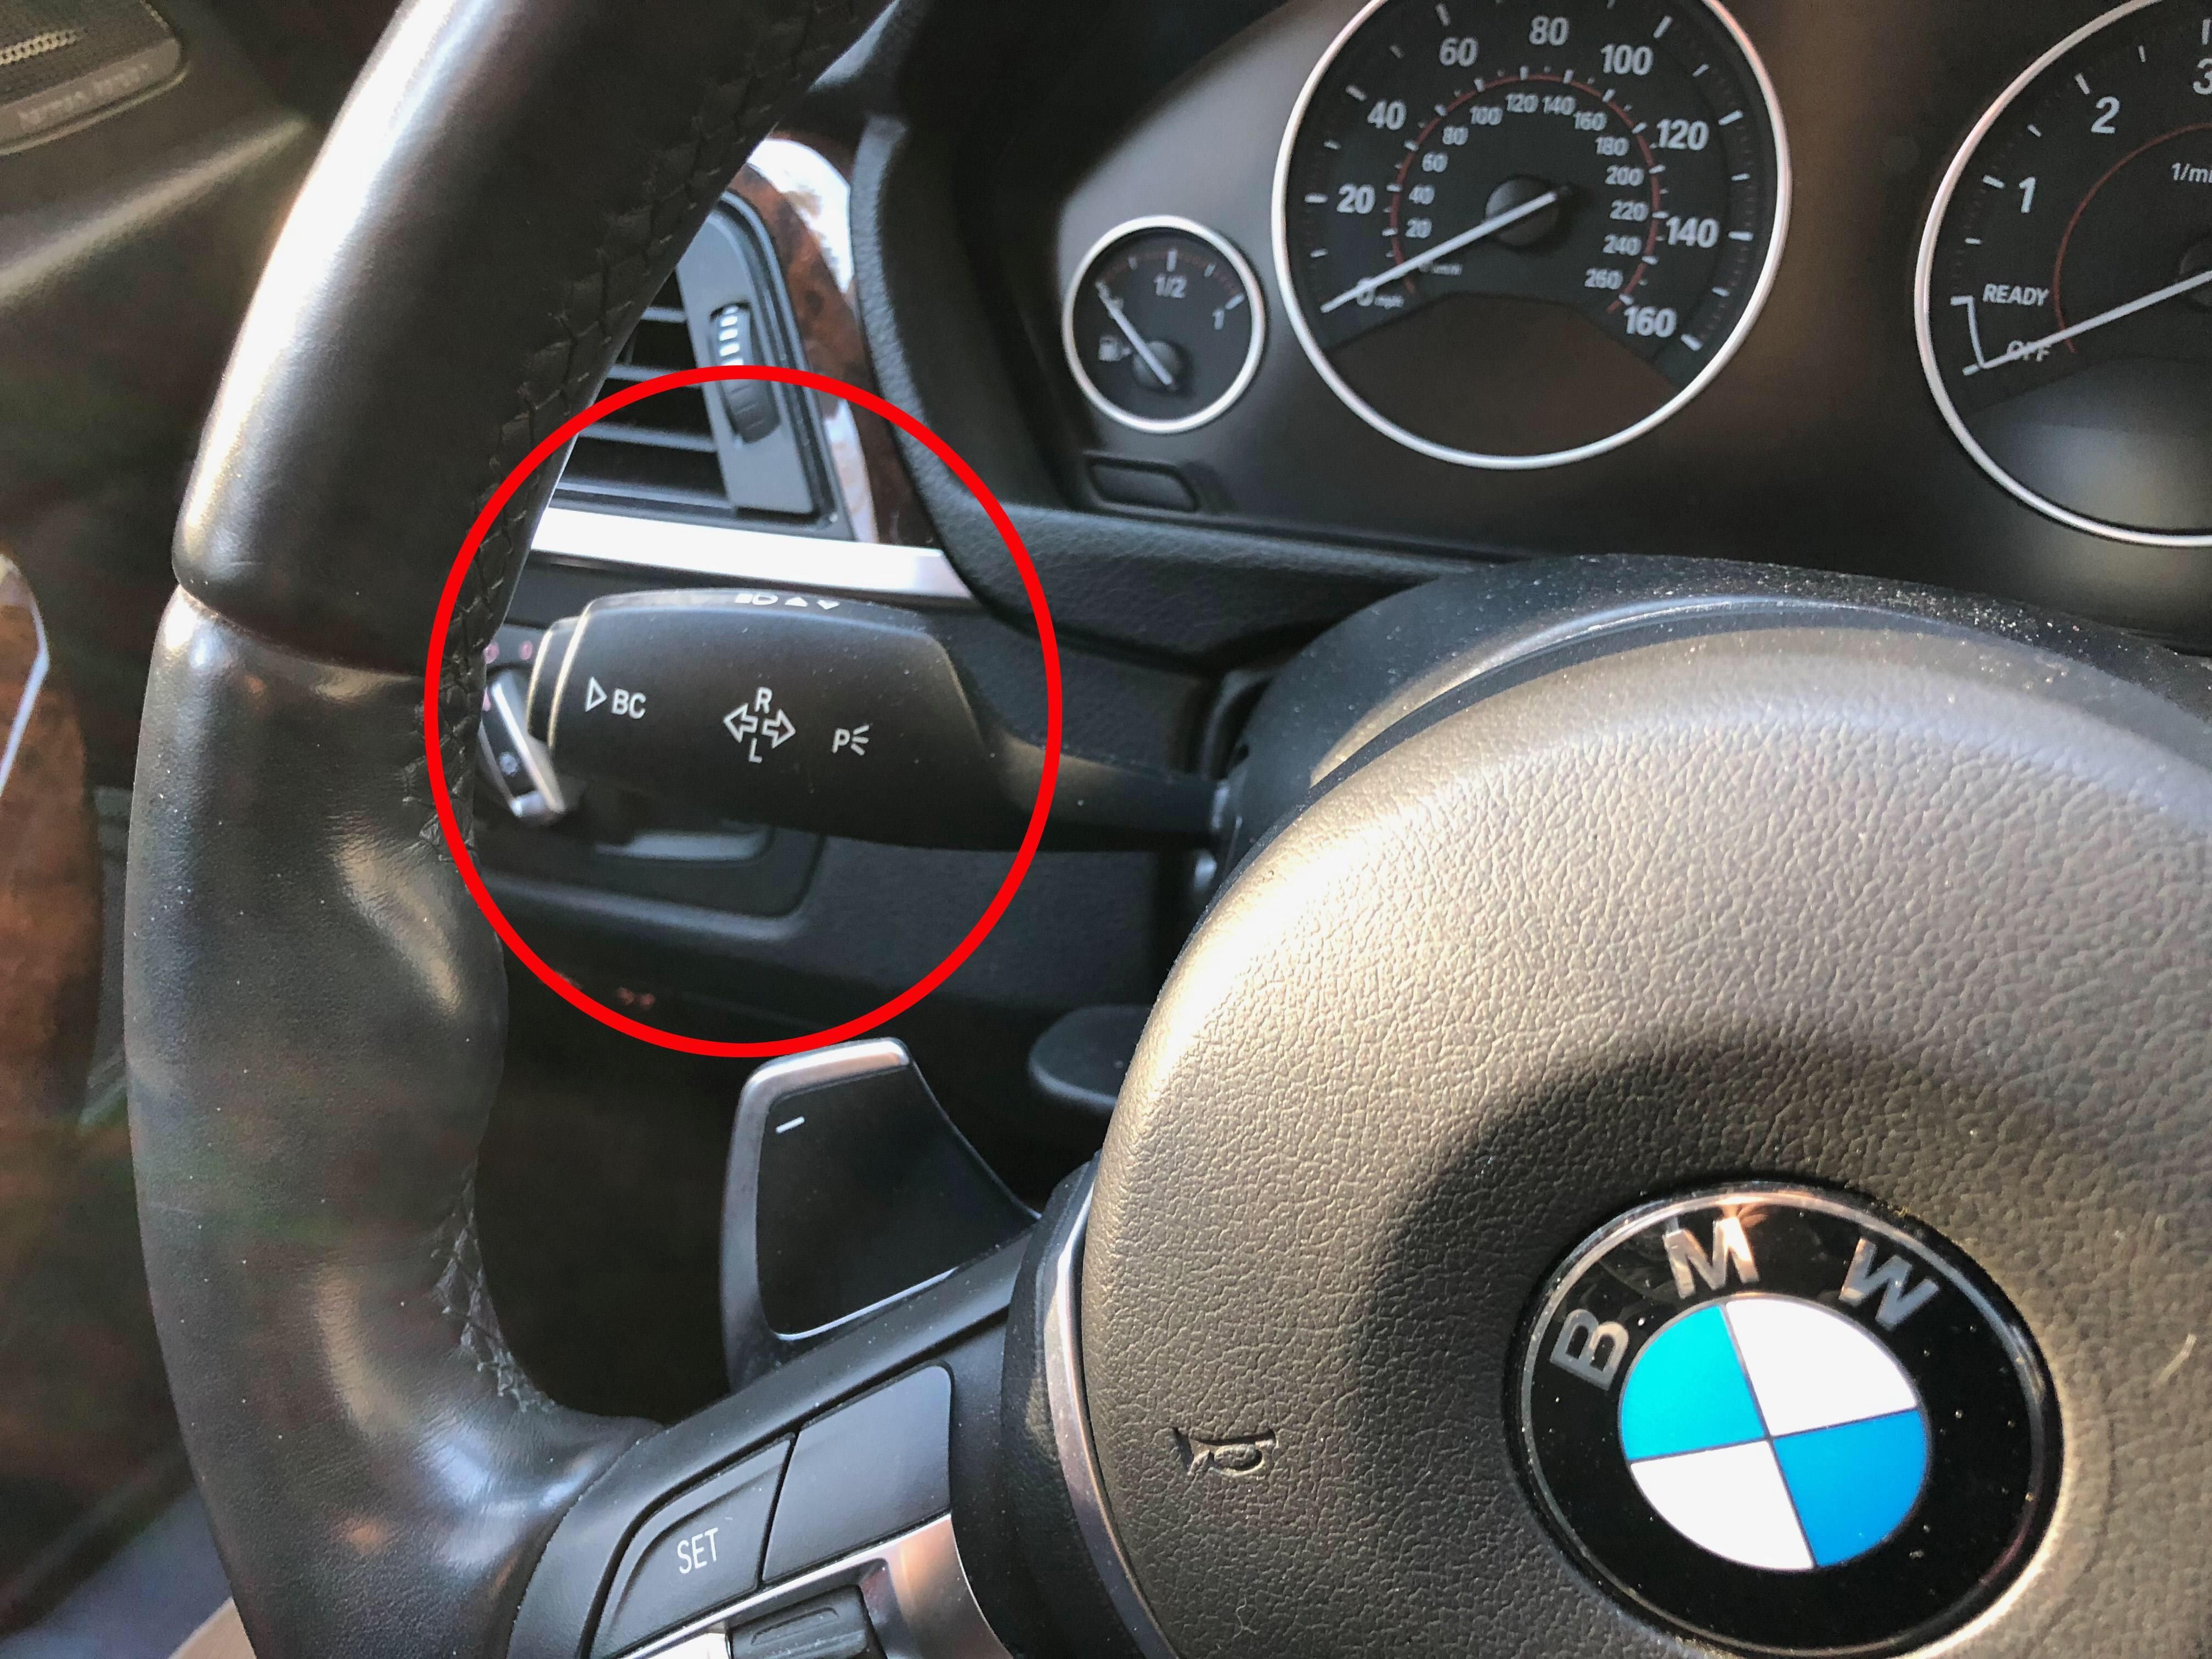 What is this thing? This is my 4th BMW and I’m just noticing it.